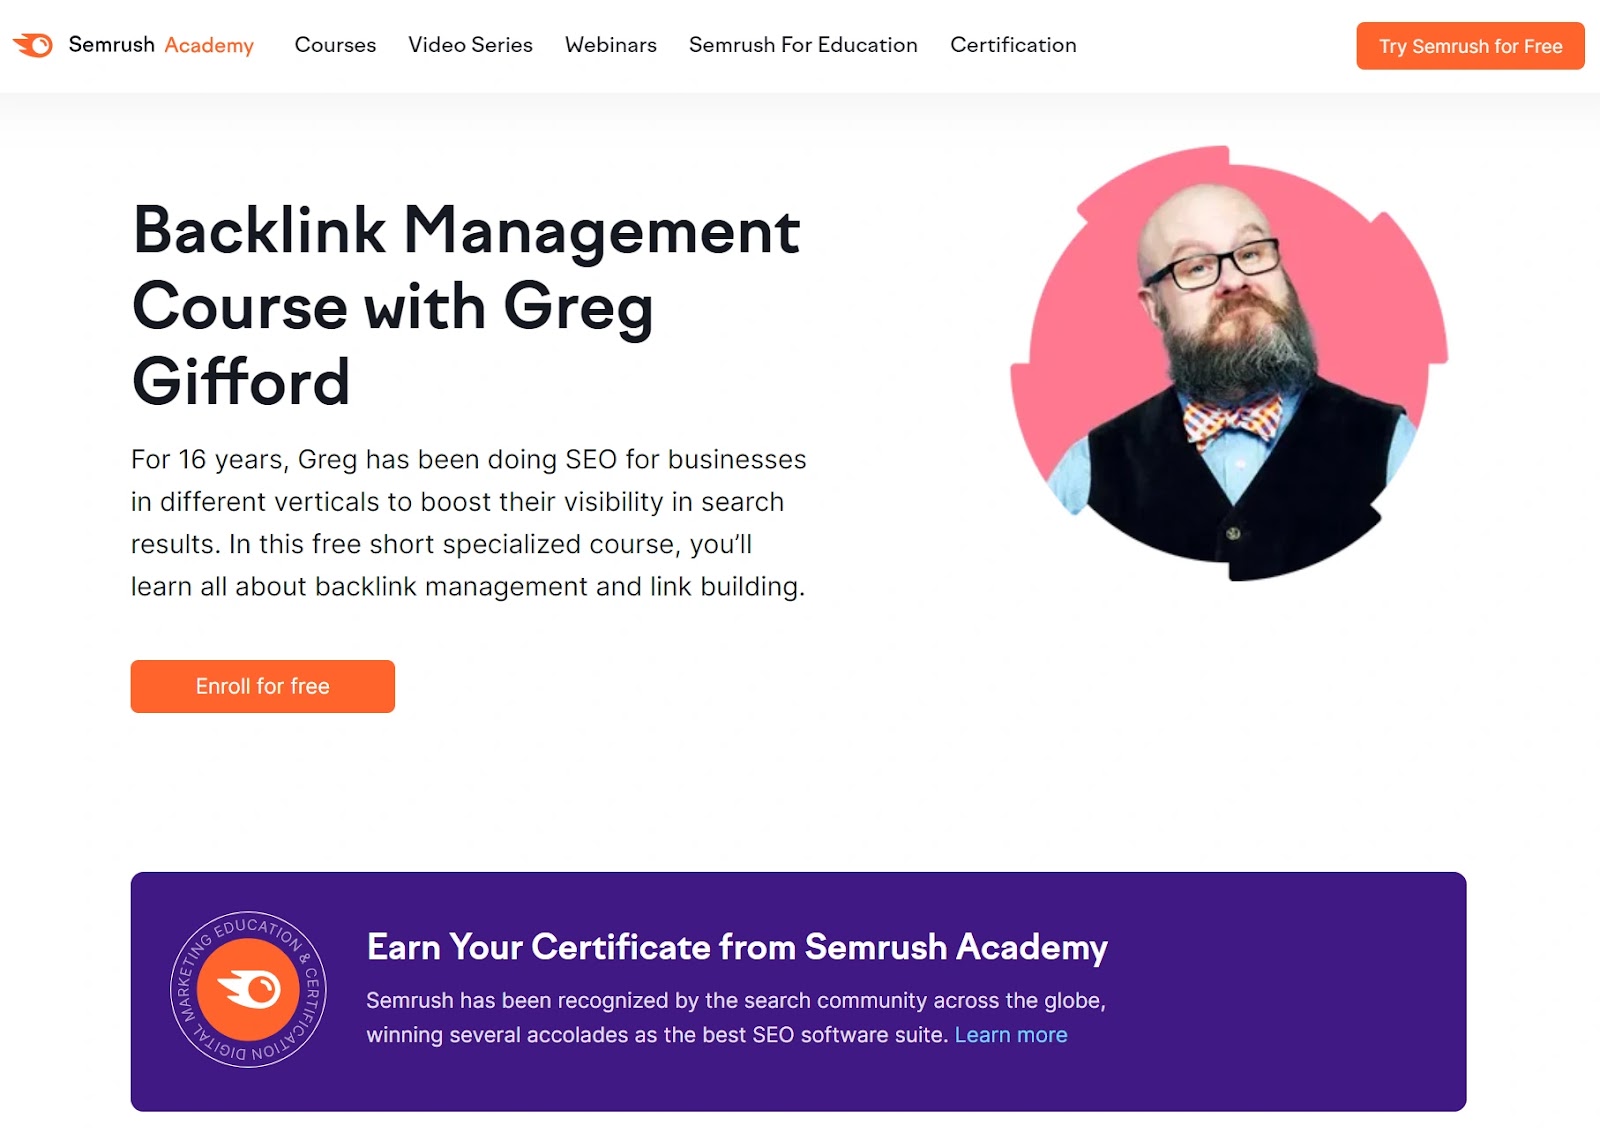 Backlink Management Course with Greg Gifford landing page